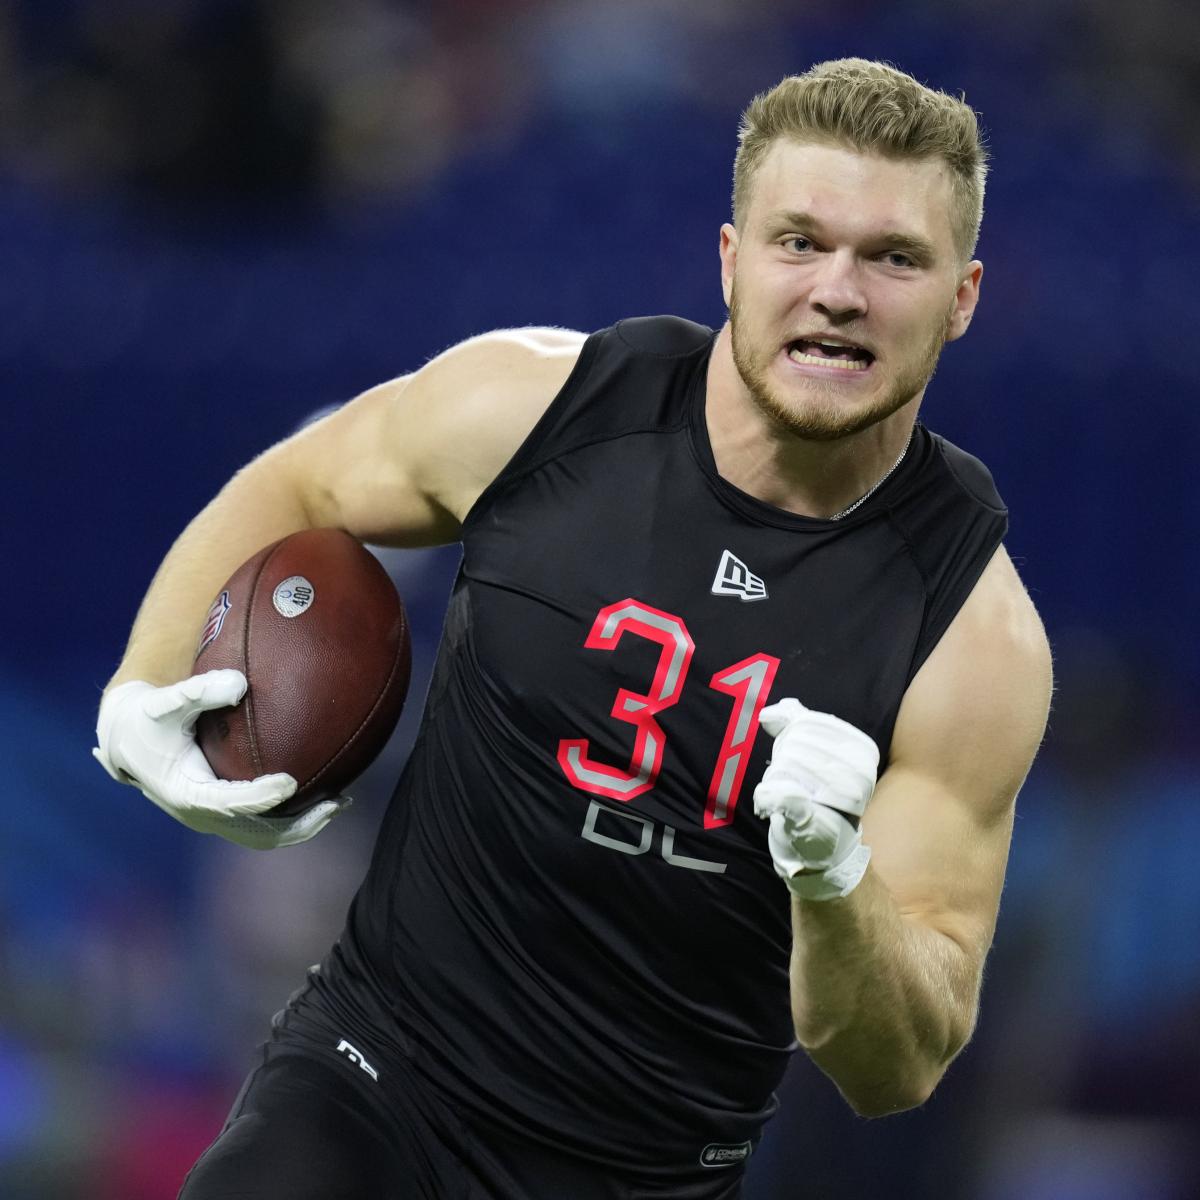 2022 NFL Draft Rumors: Latest Buzz on Aidan Hutchinson, Charles Cross and More